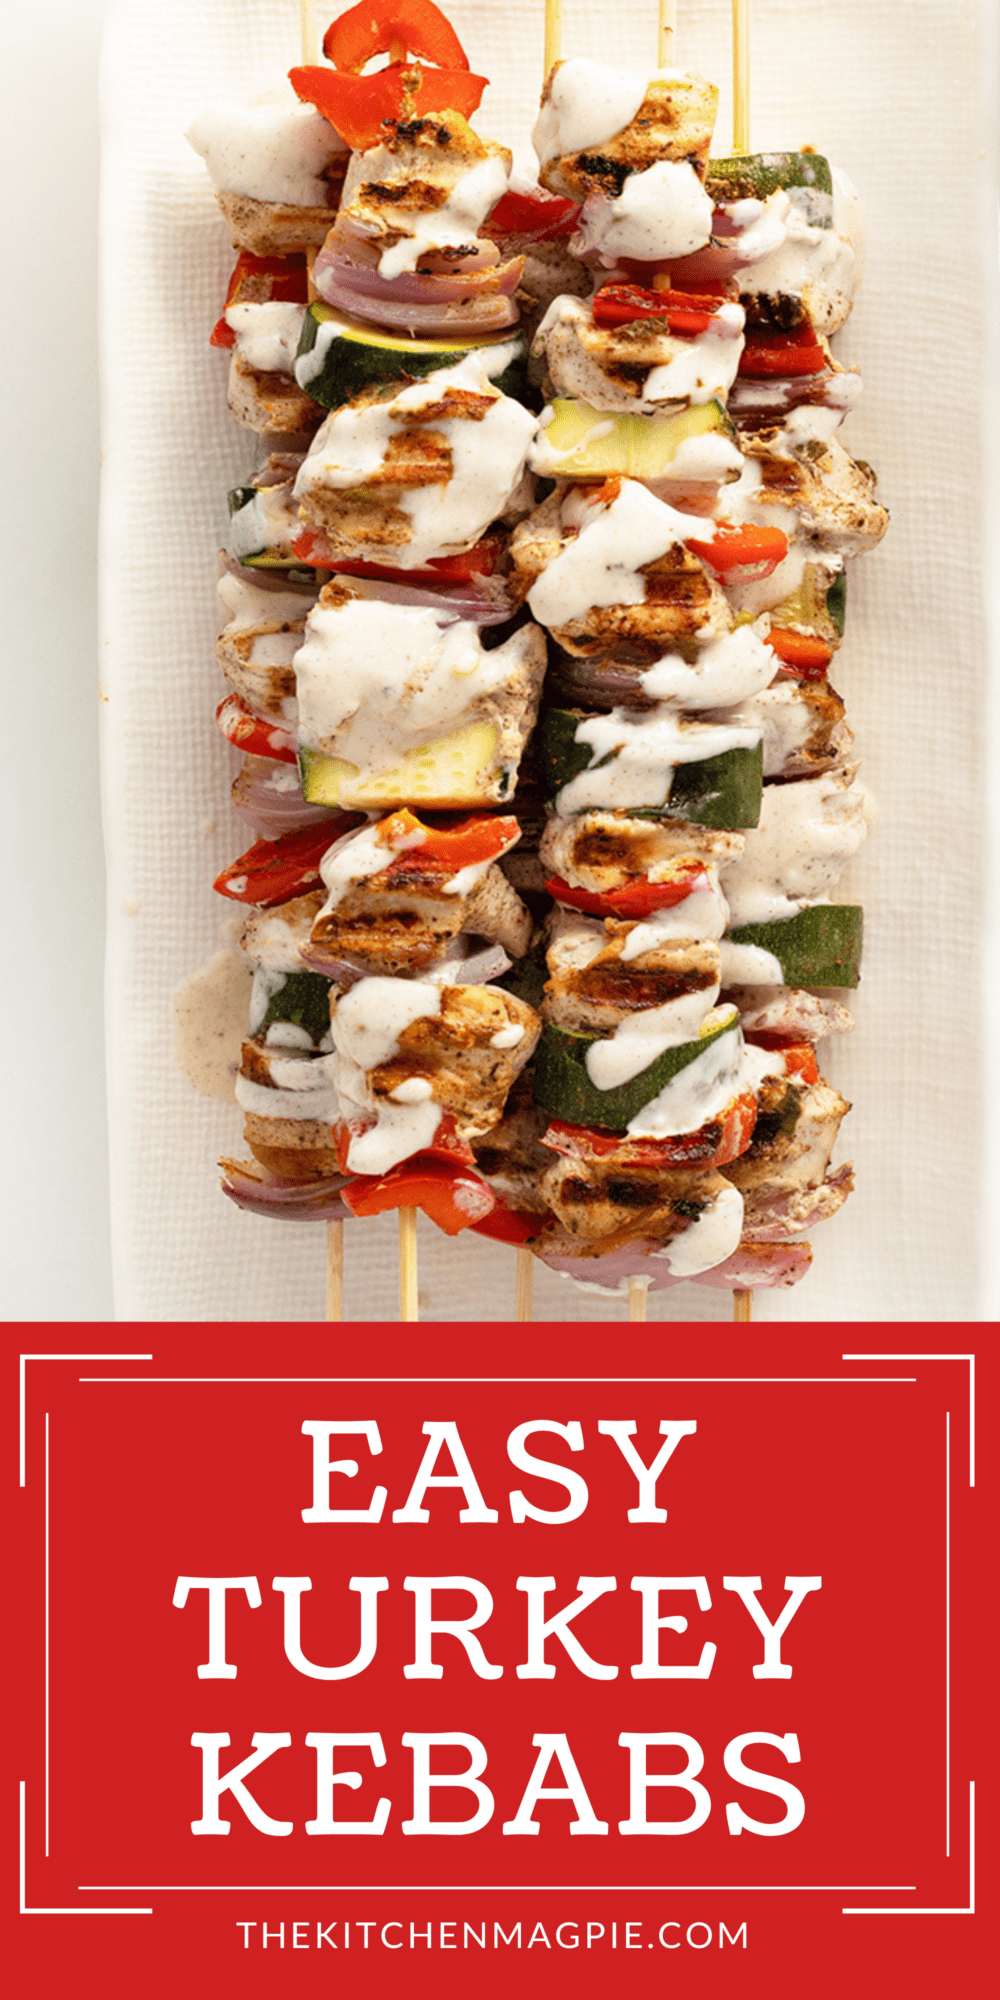 Turkey Kebabs are the perfect way to combine meat and vegetables into one dish, and these turkey kebabs do just that in a healthy way!